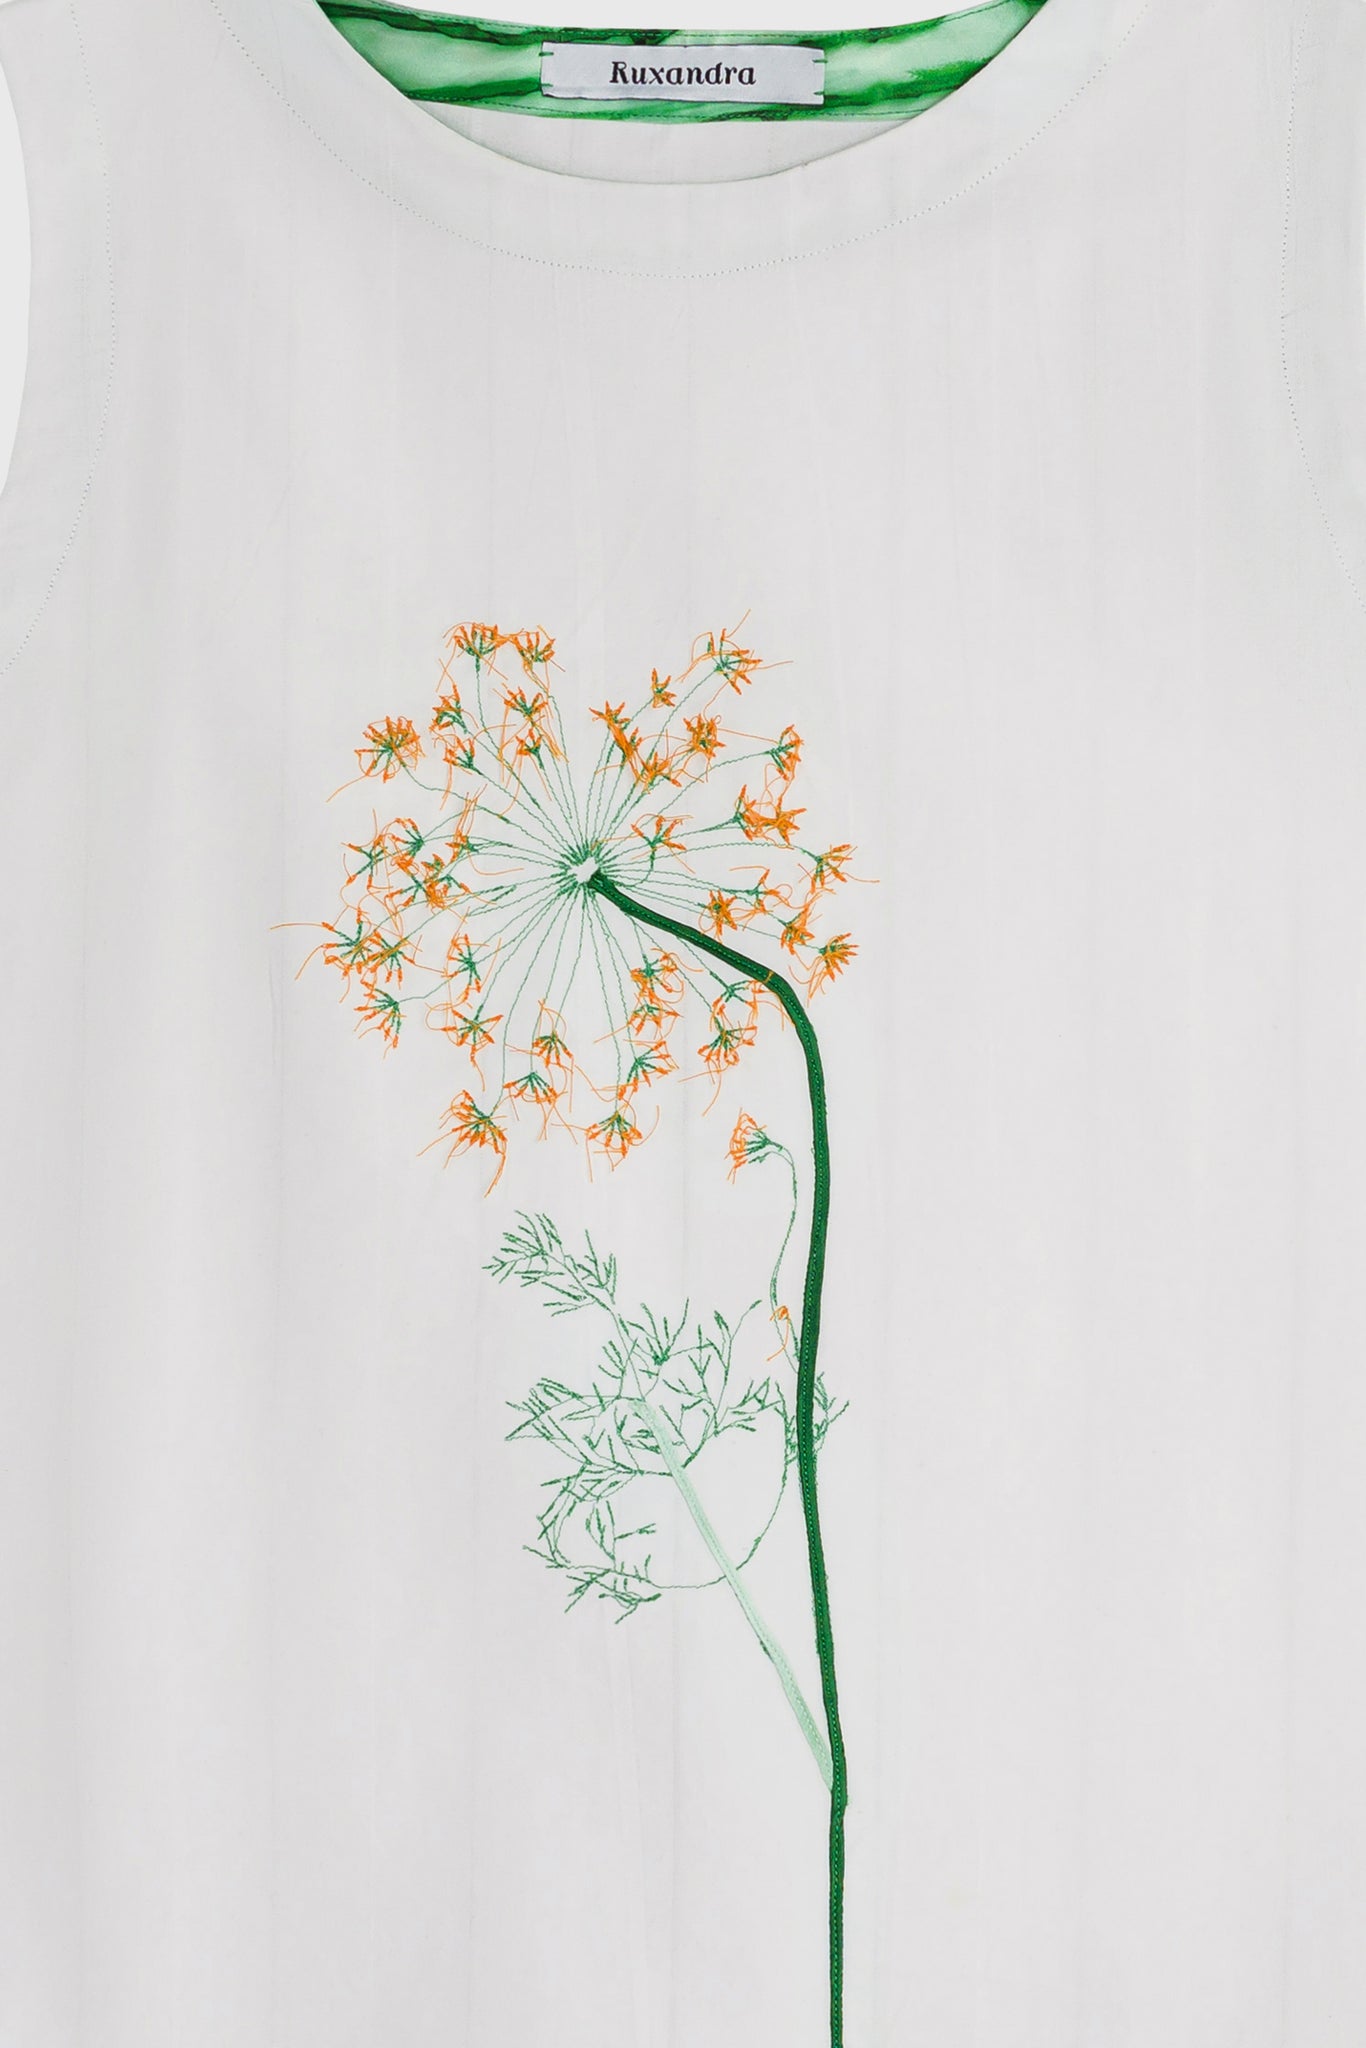 Sleeveless women's T-shirt, manual embroidery, dill flower on the front, green and orange thread, impressive and graphic, eye-catching, natural, breathable, for maternity, pure style, for playful and free spirits